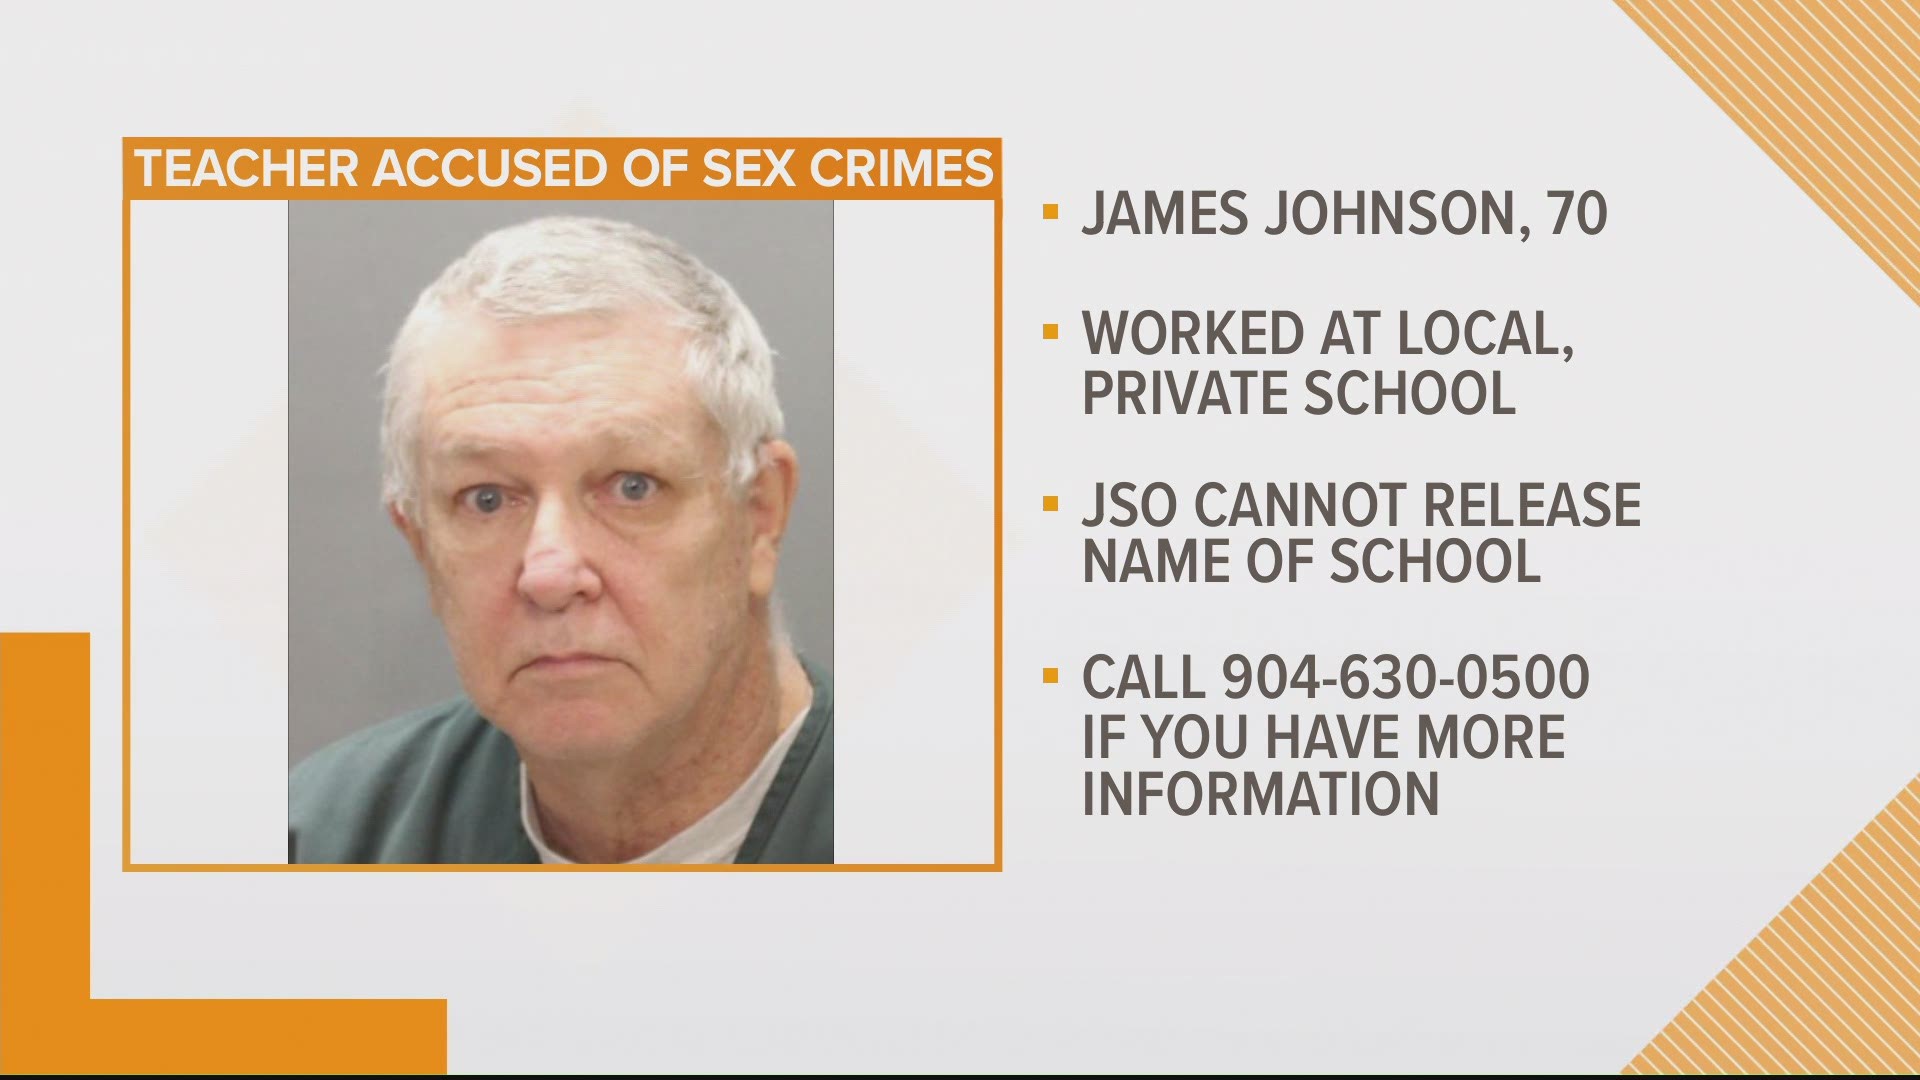 The JSO said they are searching for more possible victims of 70-year-old James Johnson. JSO can't say what school he worked at due to Marsy's Law.